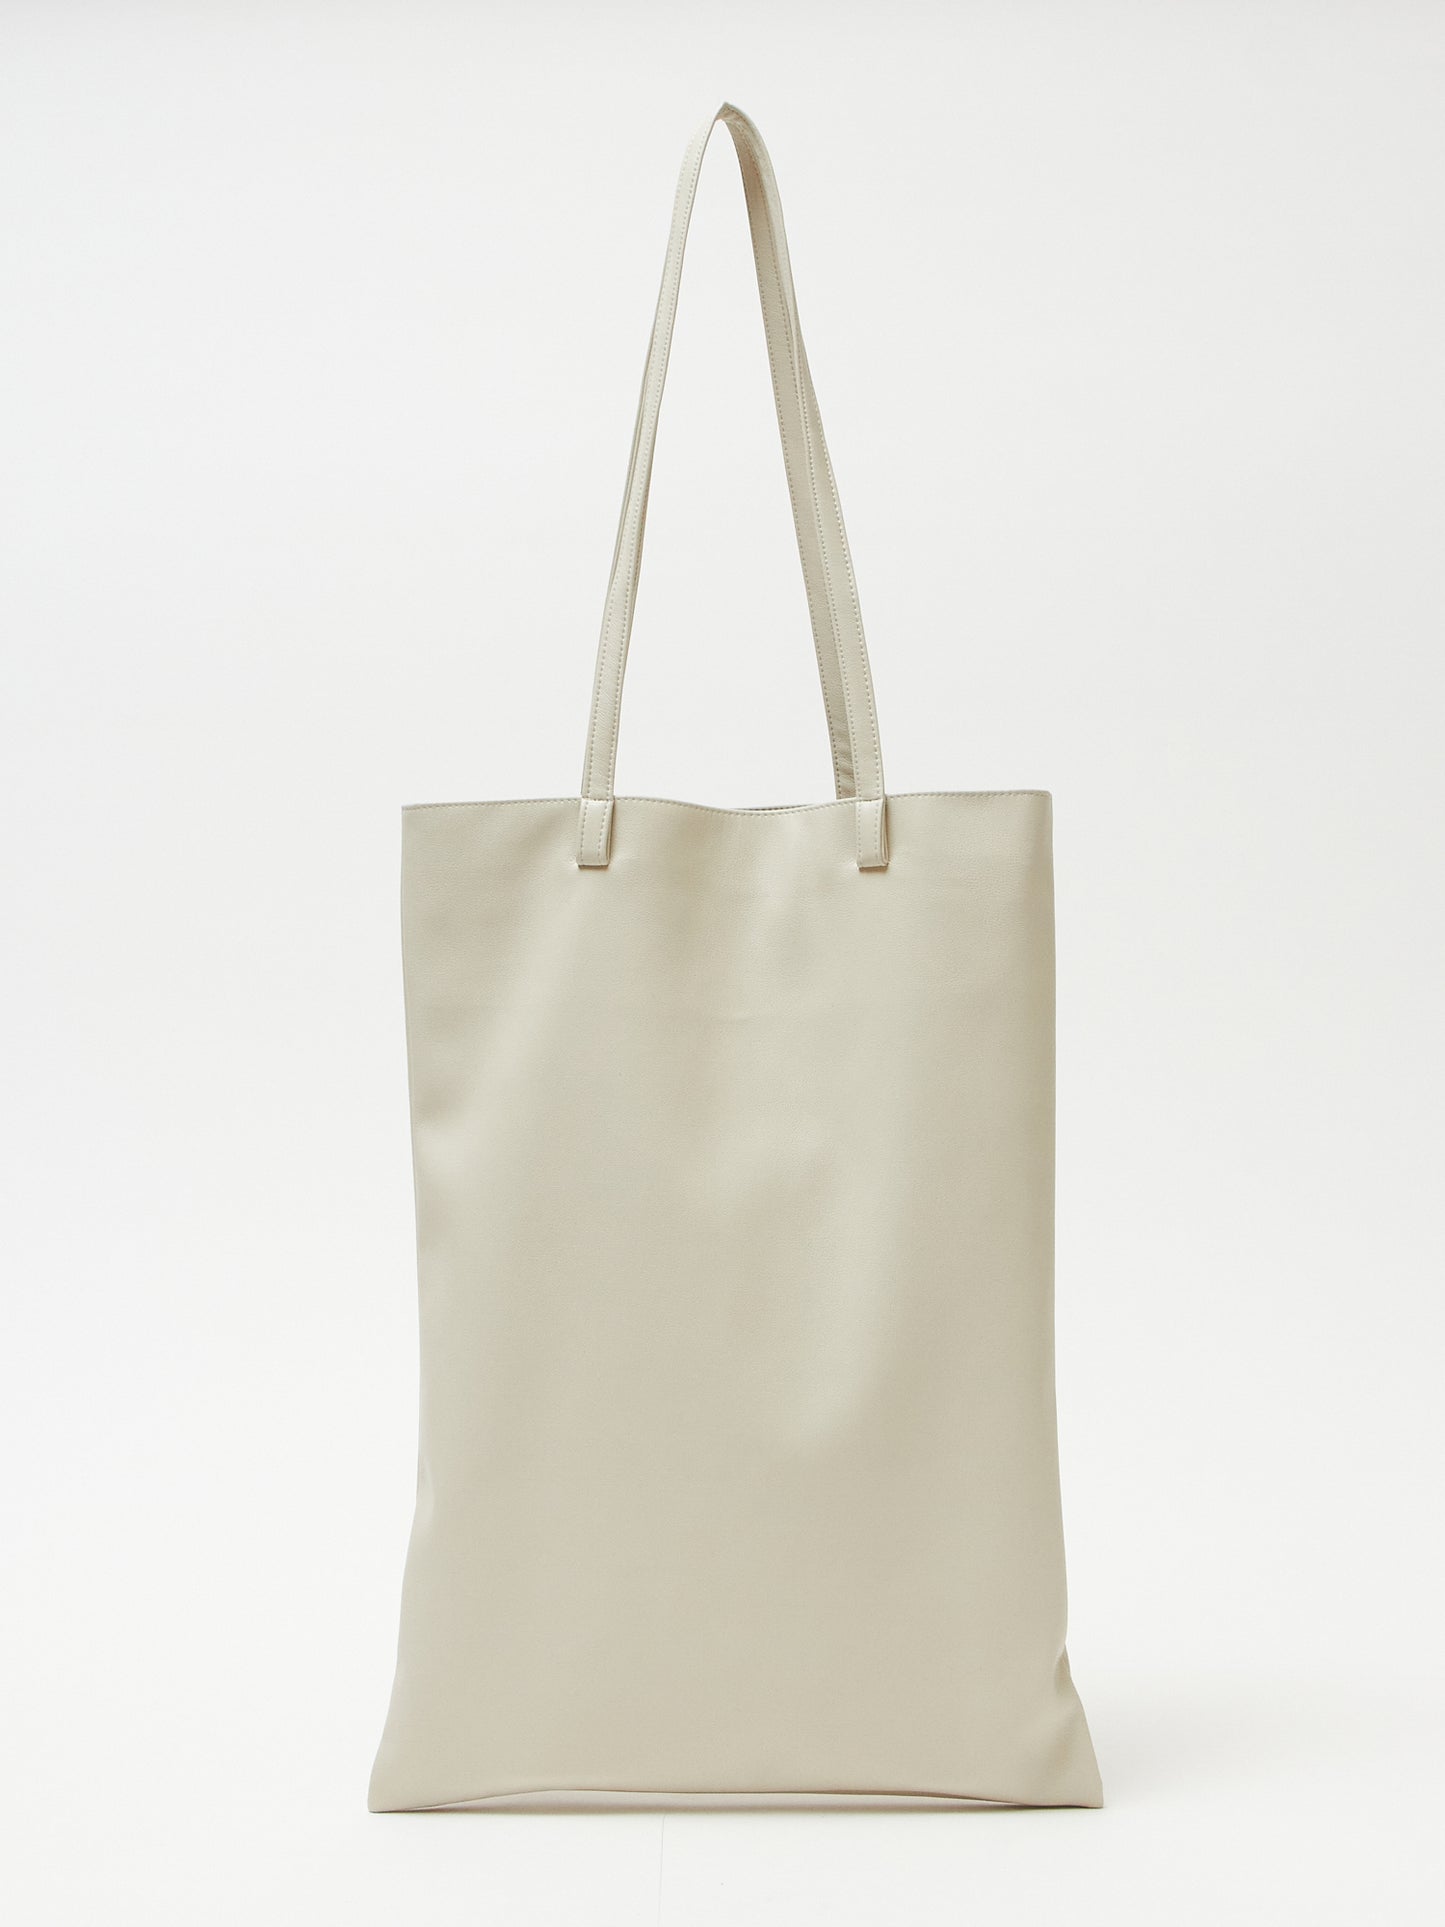 TO-GEN-KYO white leather bag